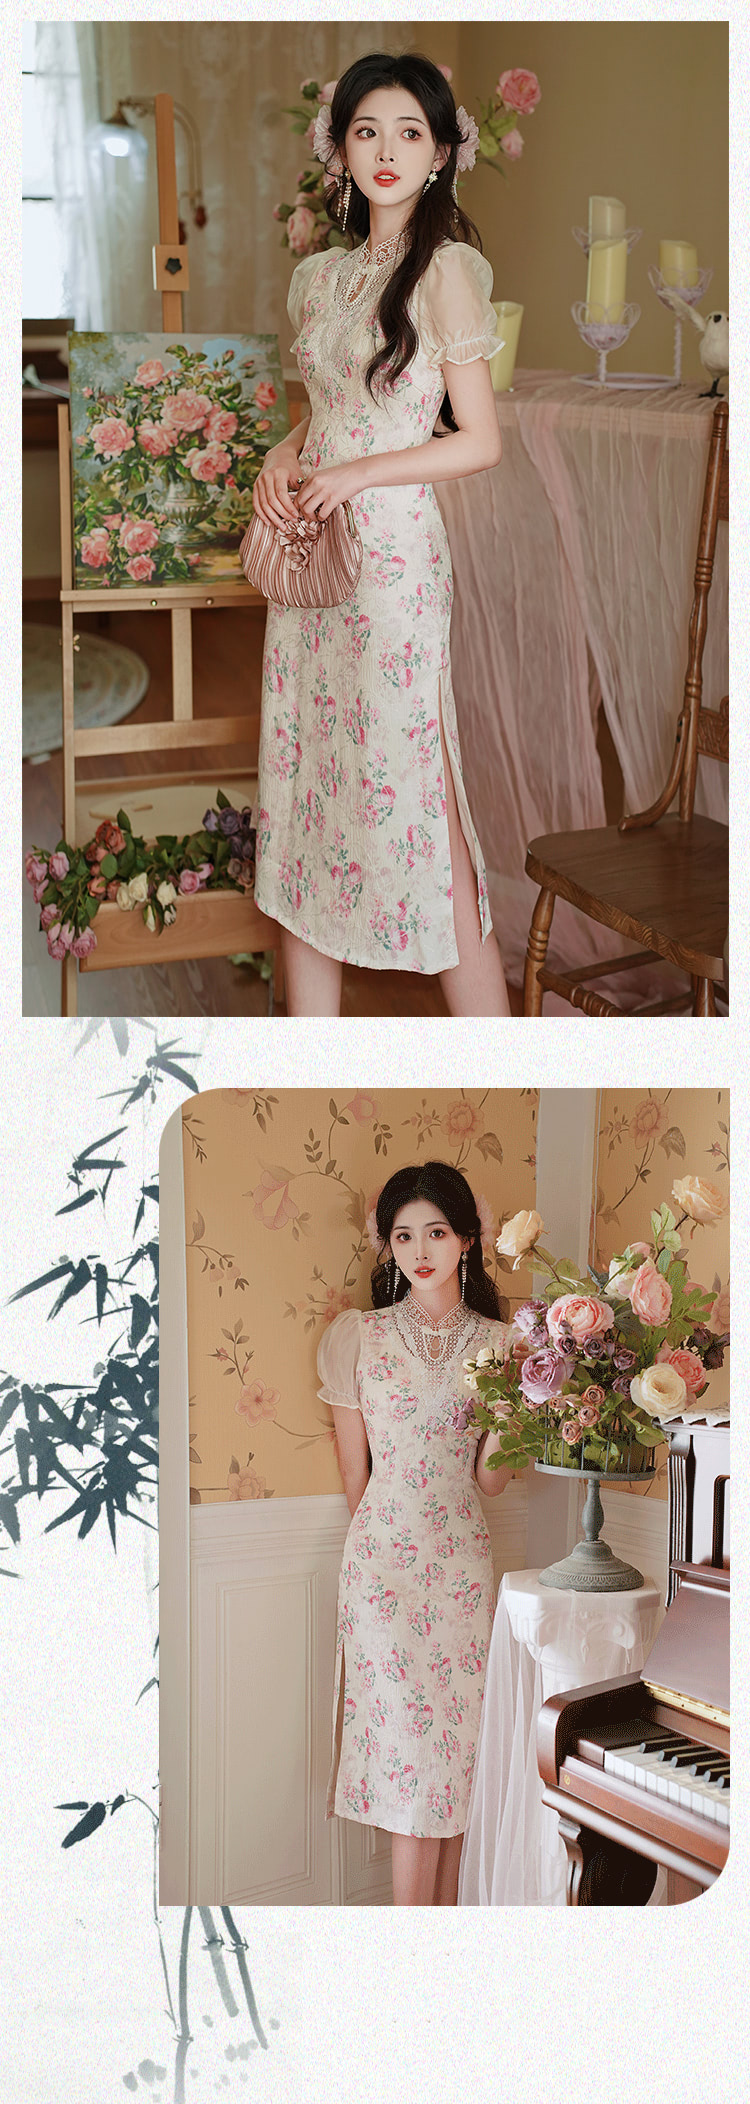 Aesthetic-Baroque-Rose-Floral-Casual-Dress-Daily-Work-Dating-Outfits09